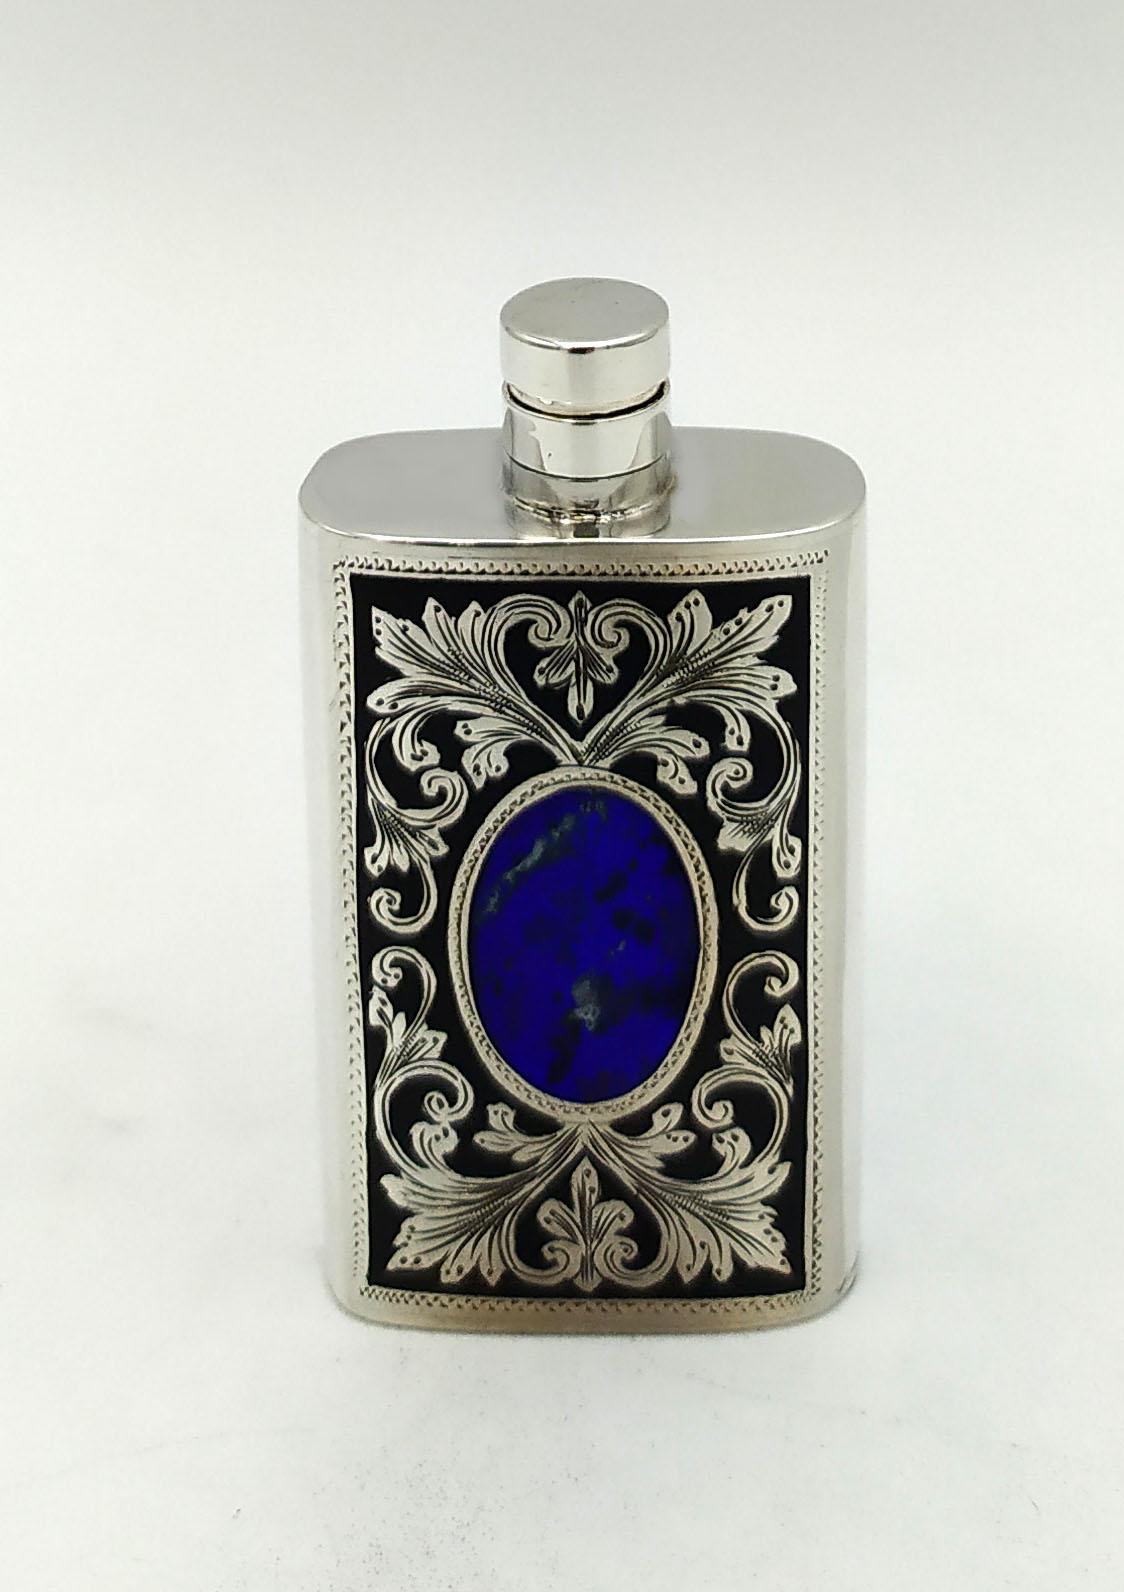 Ovalized Handbag Perfume Holder is in 925/1000 Sterling Silver. 
Handbag Perfume Holder with Screwed cap. 
Handbag Perfume Holder with very fine Baroque Style manual Engraving with decorations and central oval, front and back.
Handbag Perfume Holder